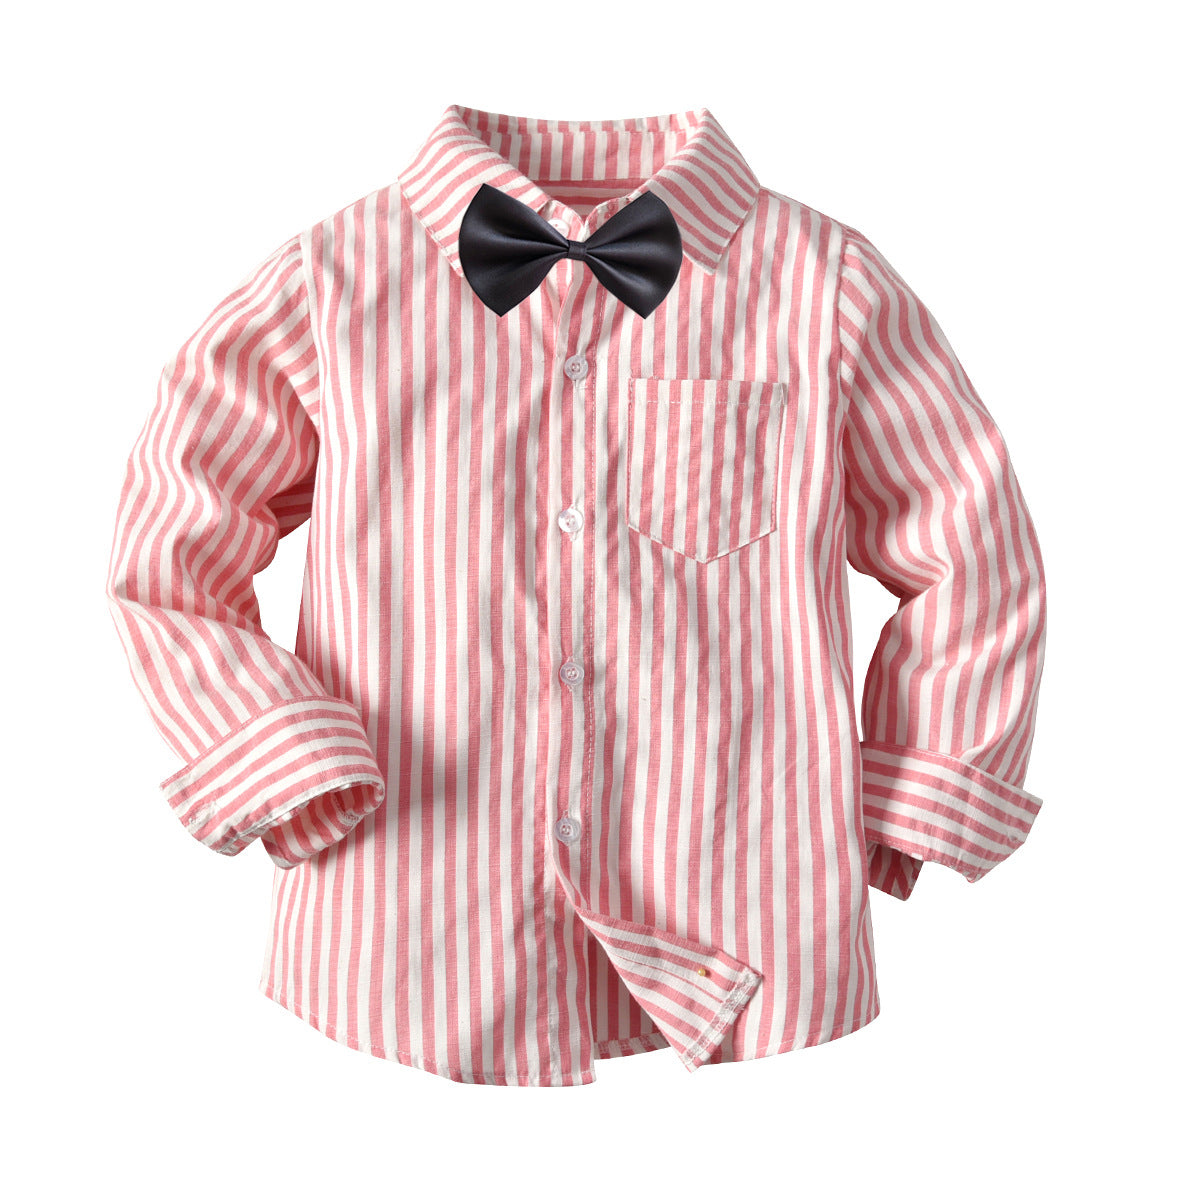 Boys Cotton Long Sleeve Stripped Shirt With Bow